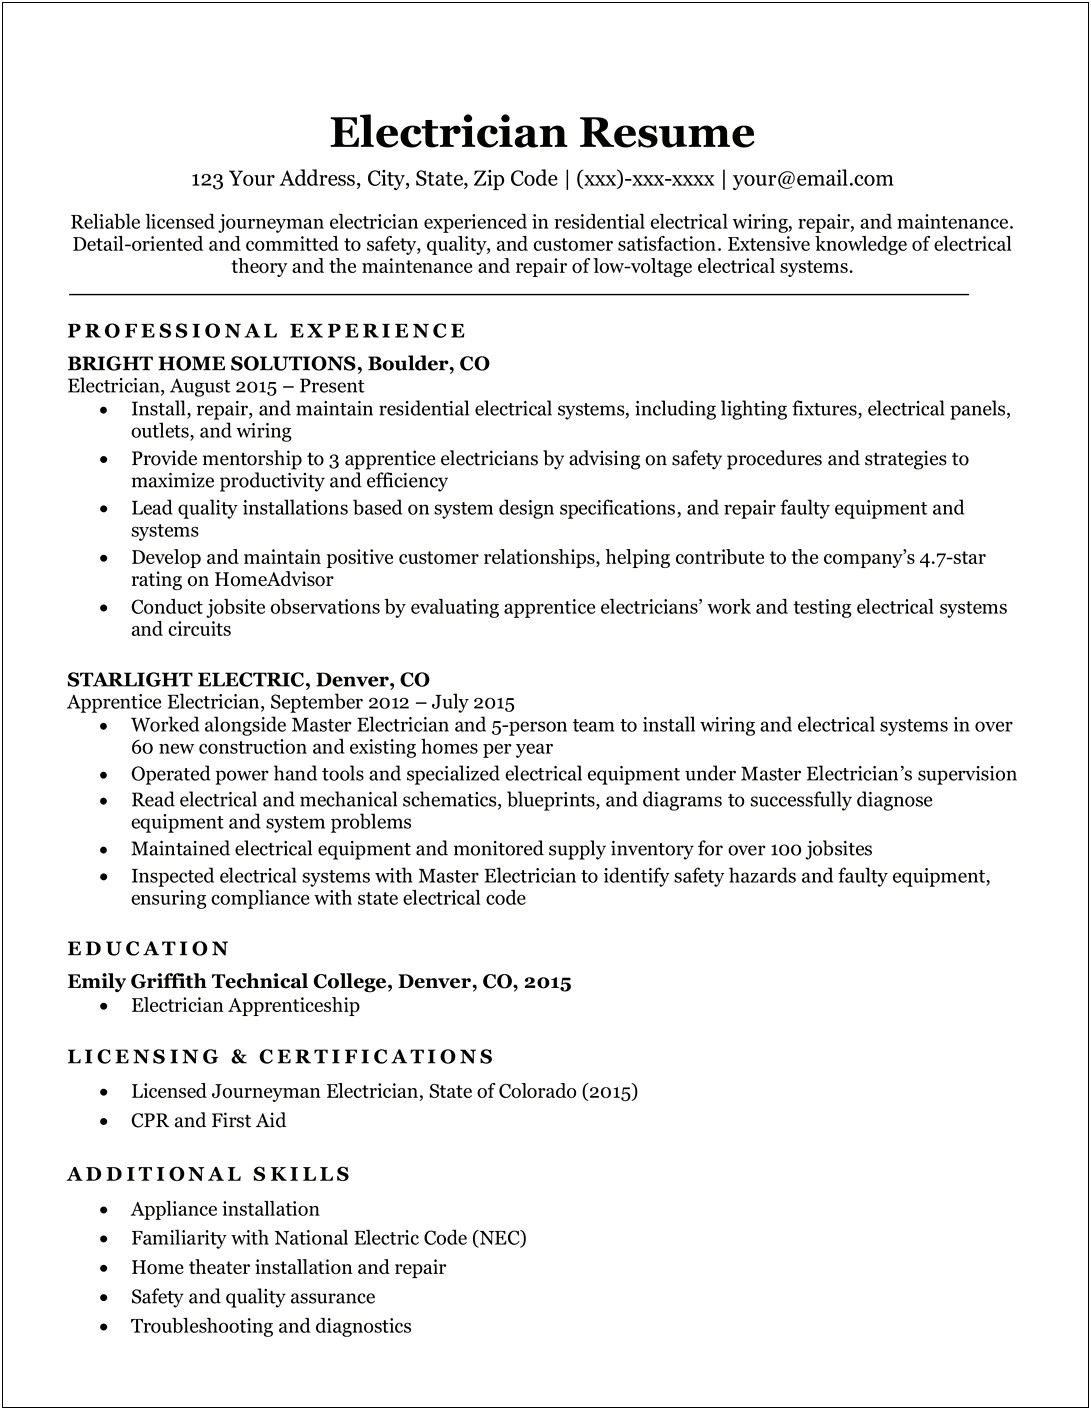 Resume Objective For Quality Assurance Technician